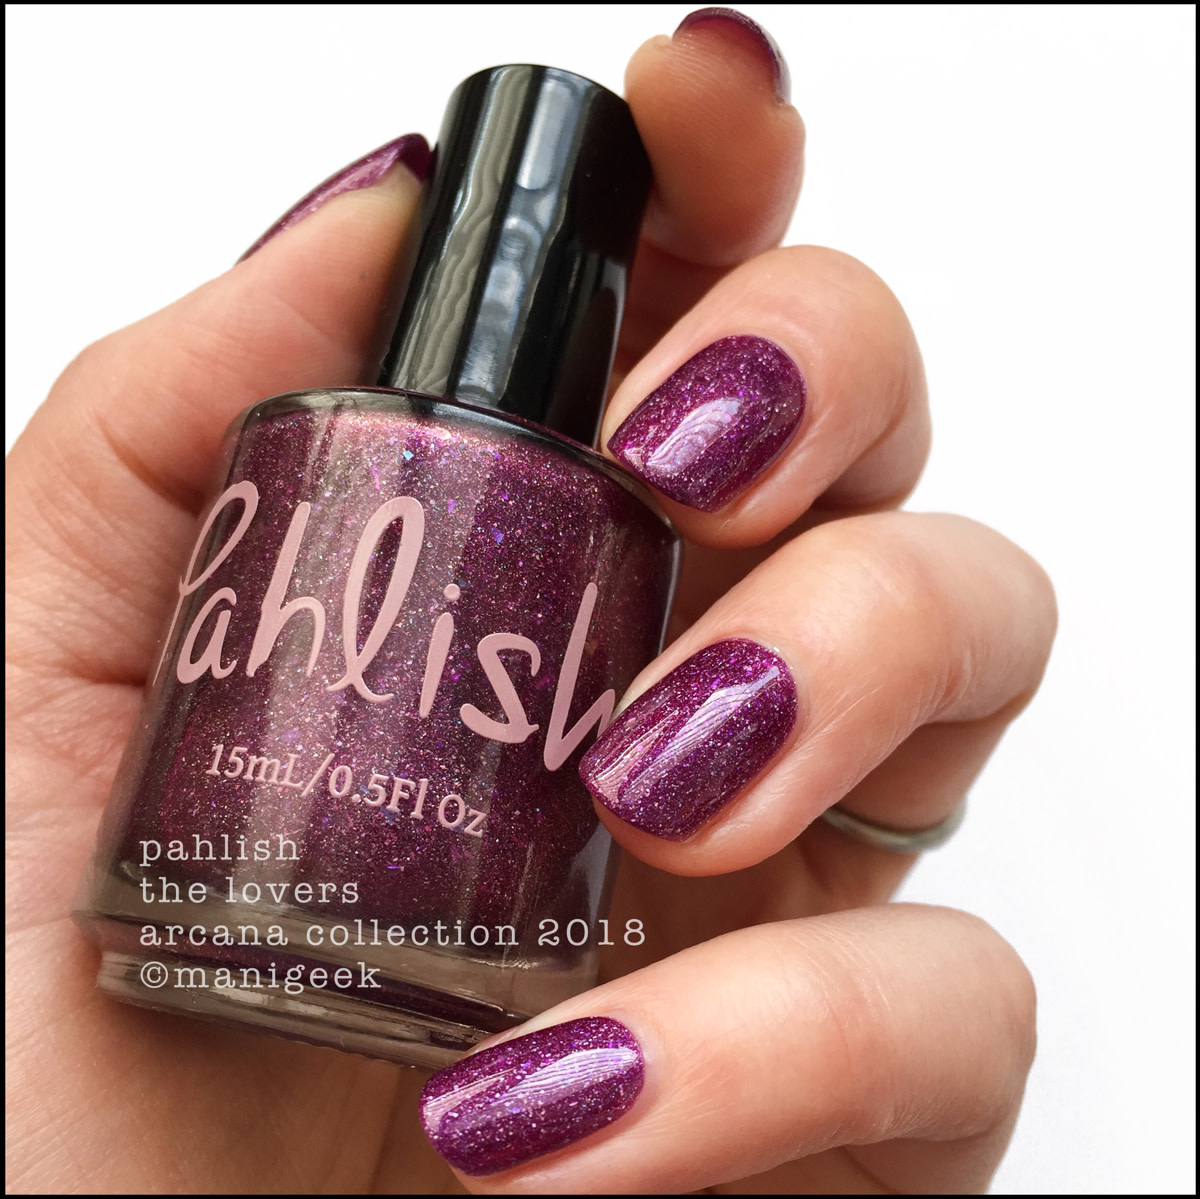 Pahlish The Lovers - Pahlish Arcana Collection Swatches Review 2018